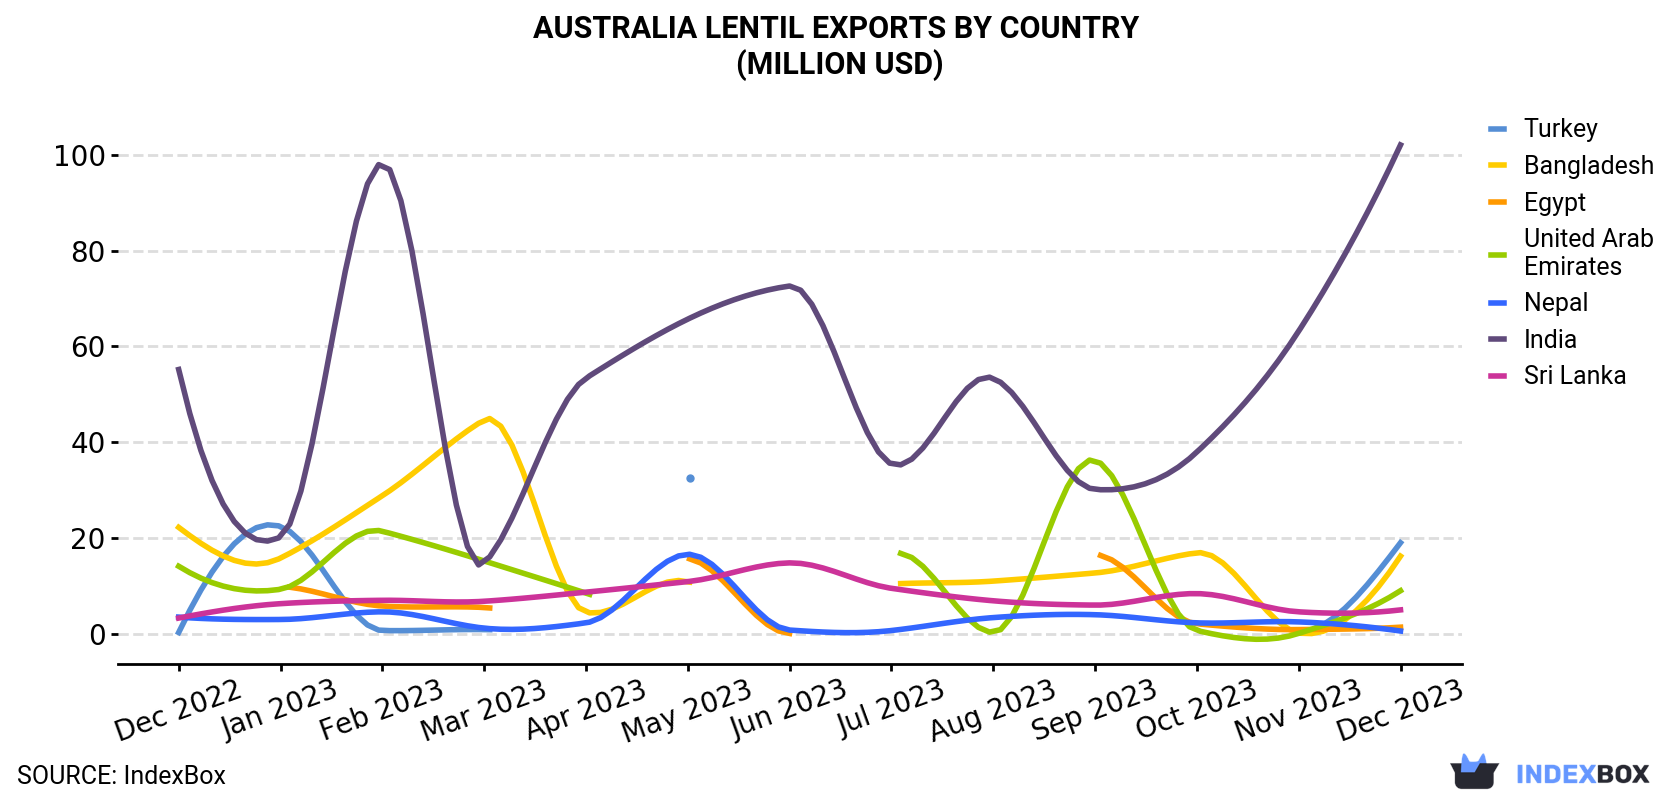 Australia Lentil Exports By Country (Million USD)